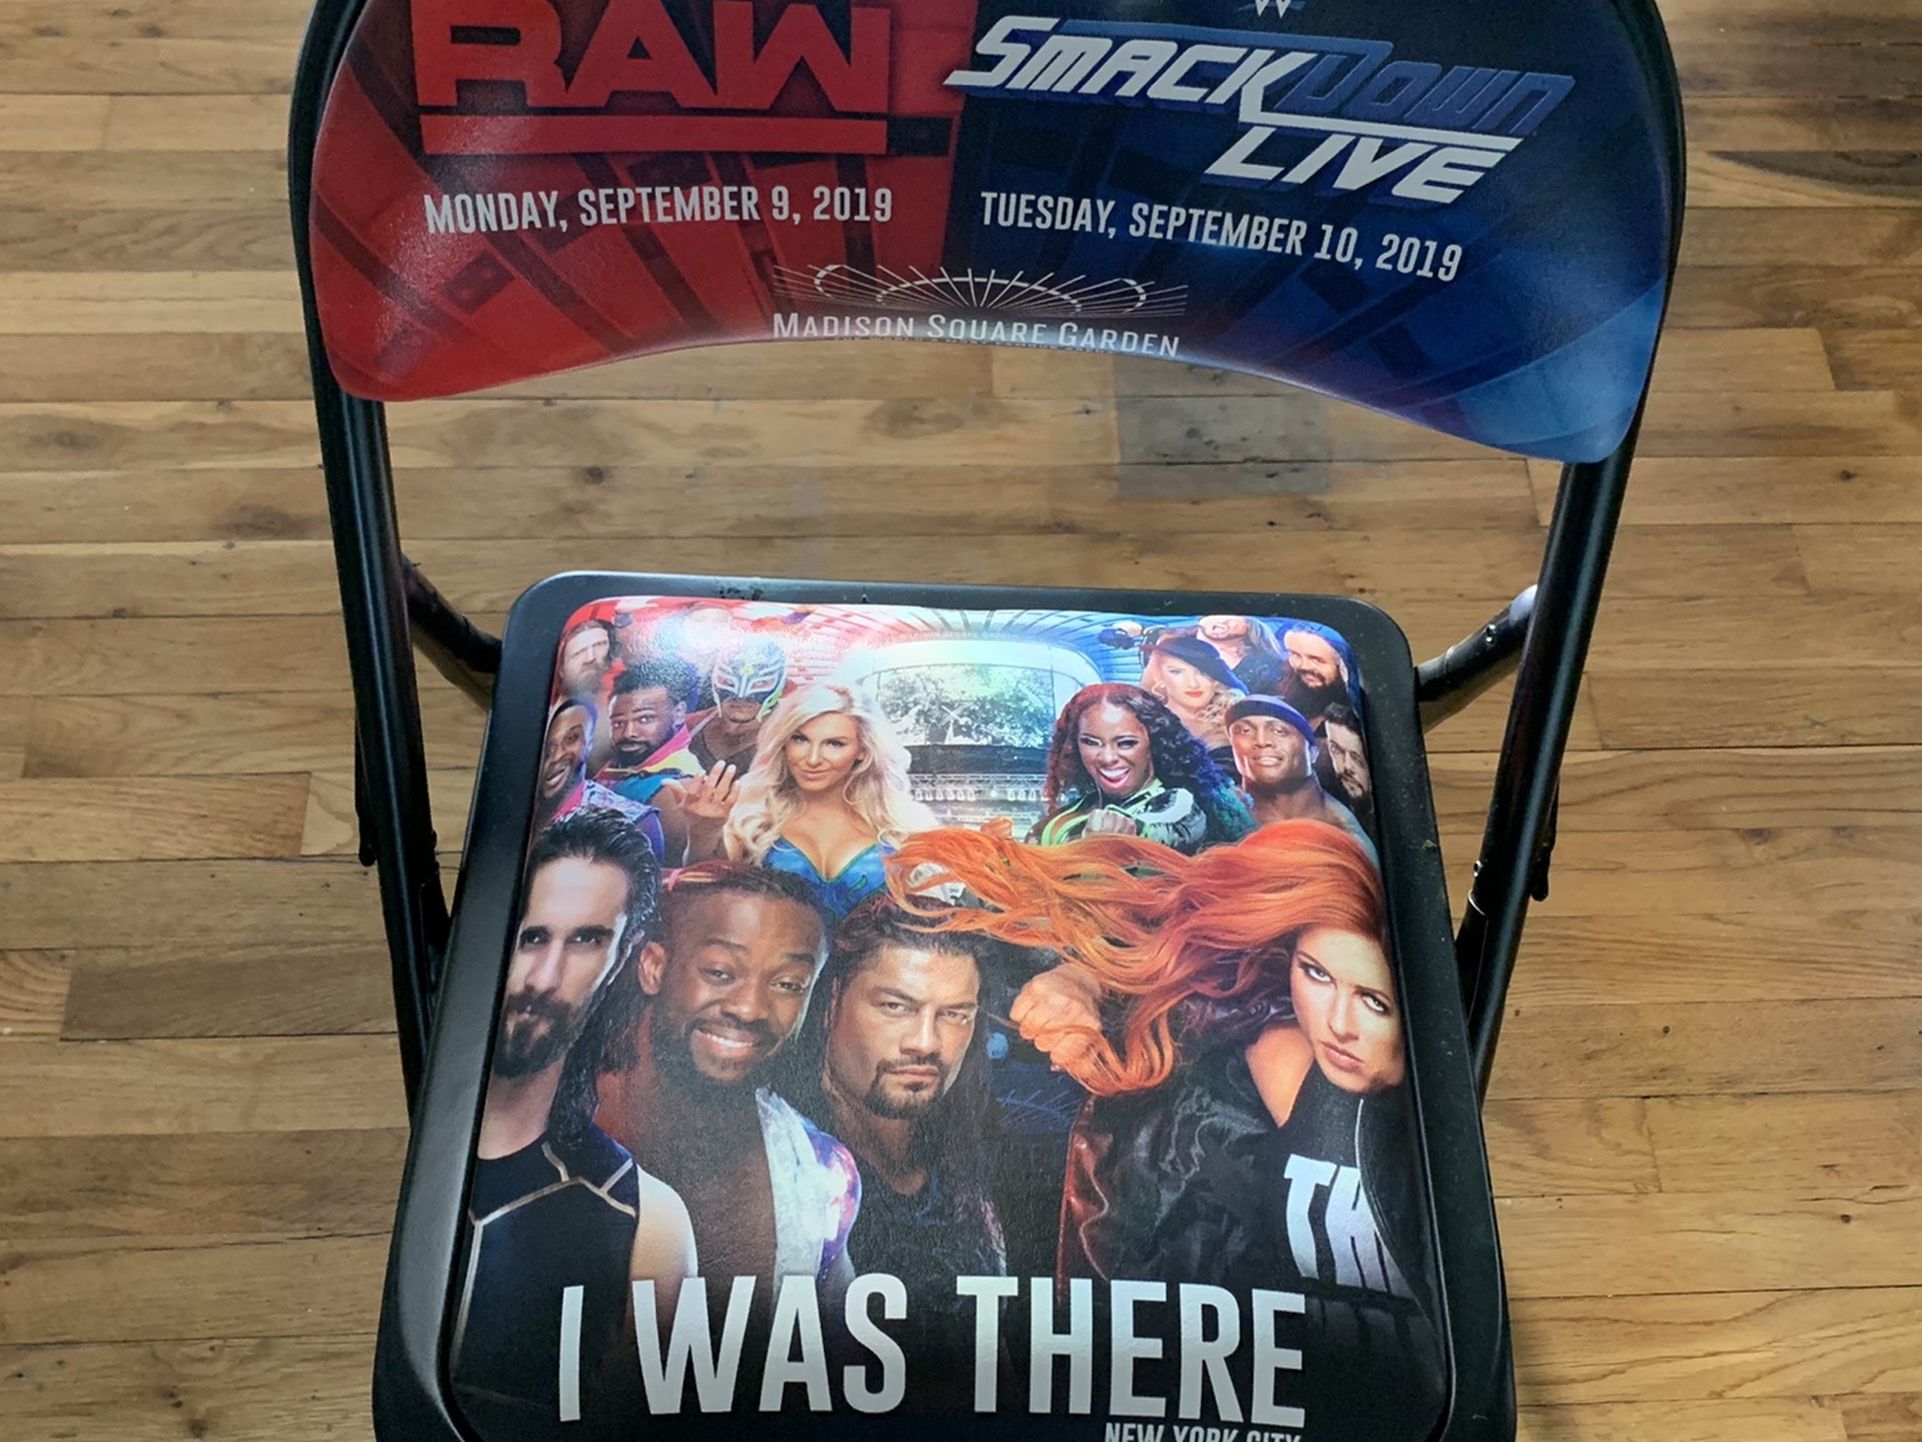 Wwe Chair Smackdown/Raw Madison Square Garden